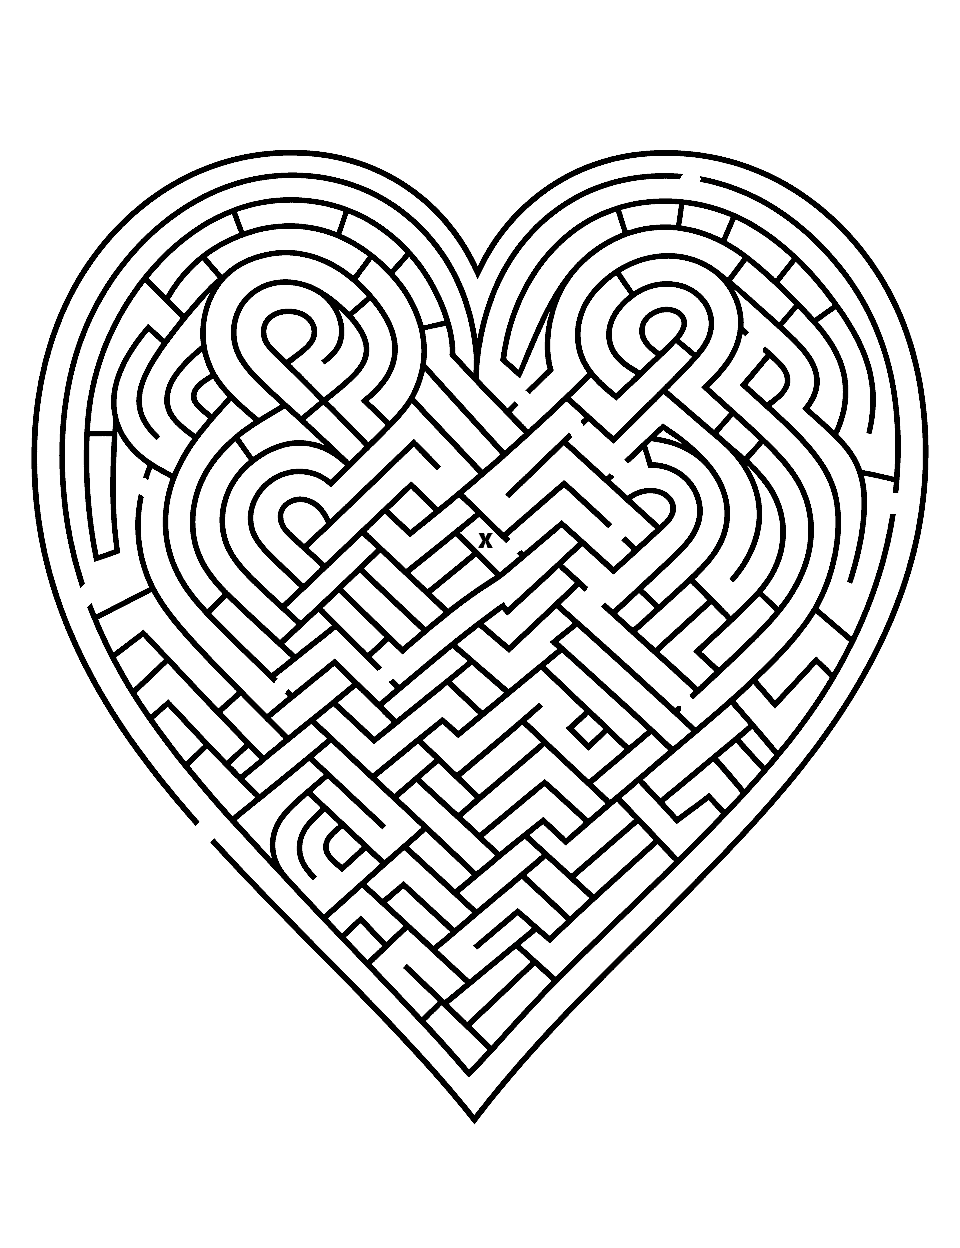 Heart Maze Coloring Page - A fun maze in the shape of a heart.